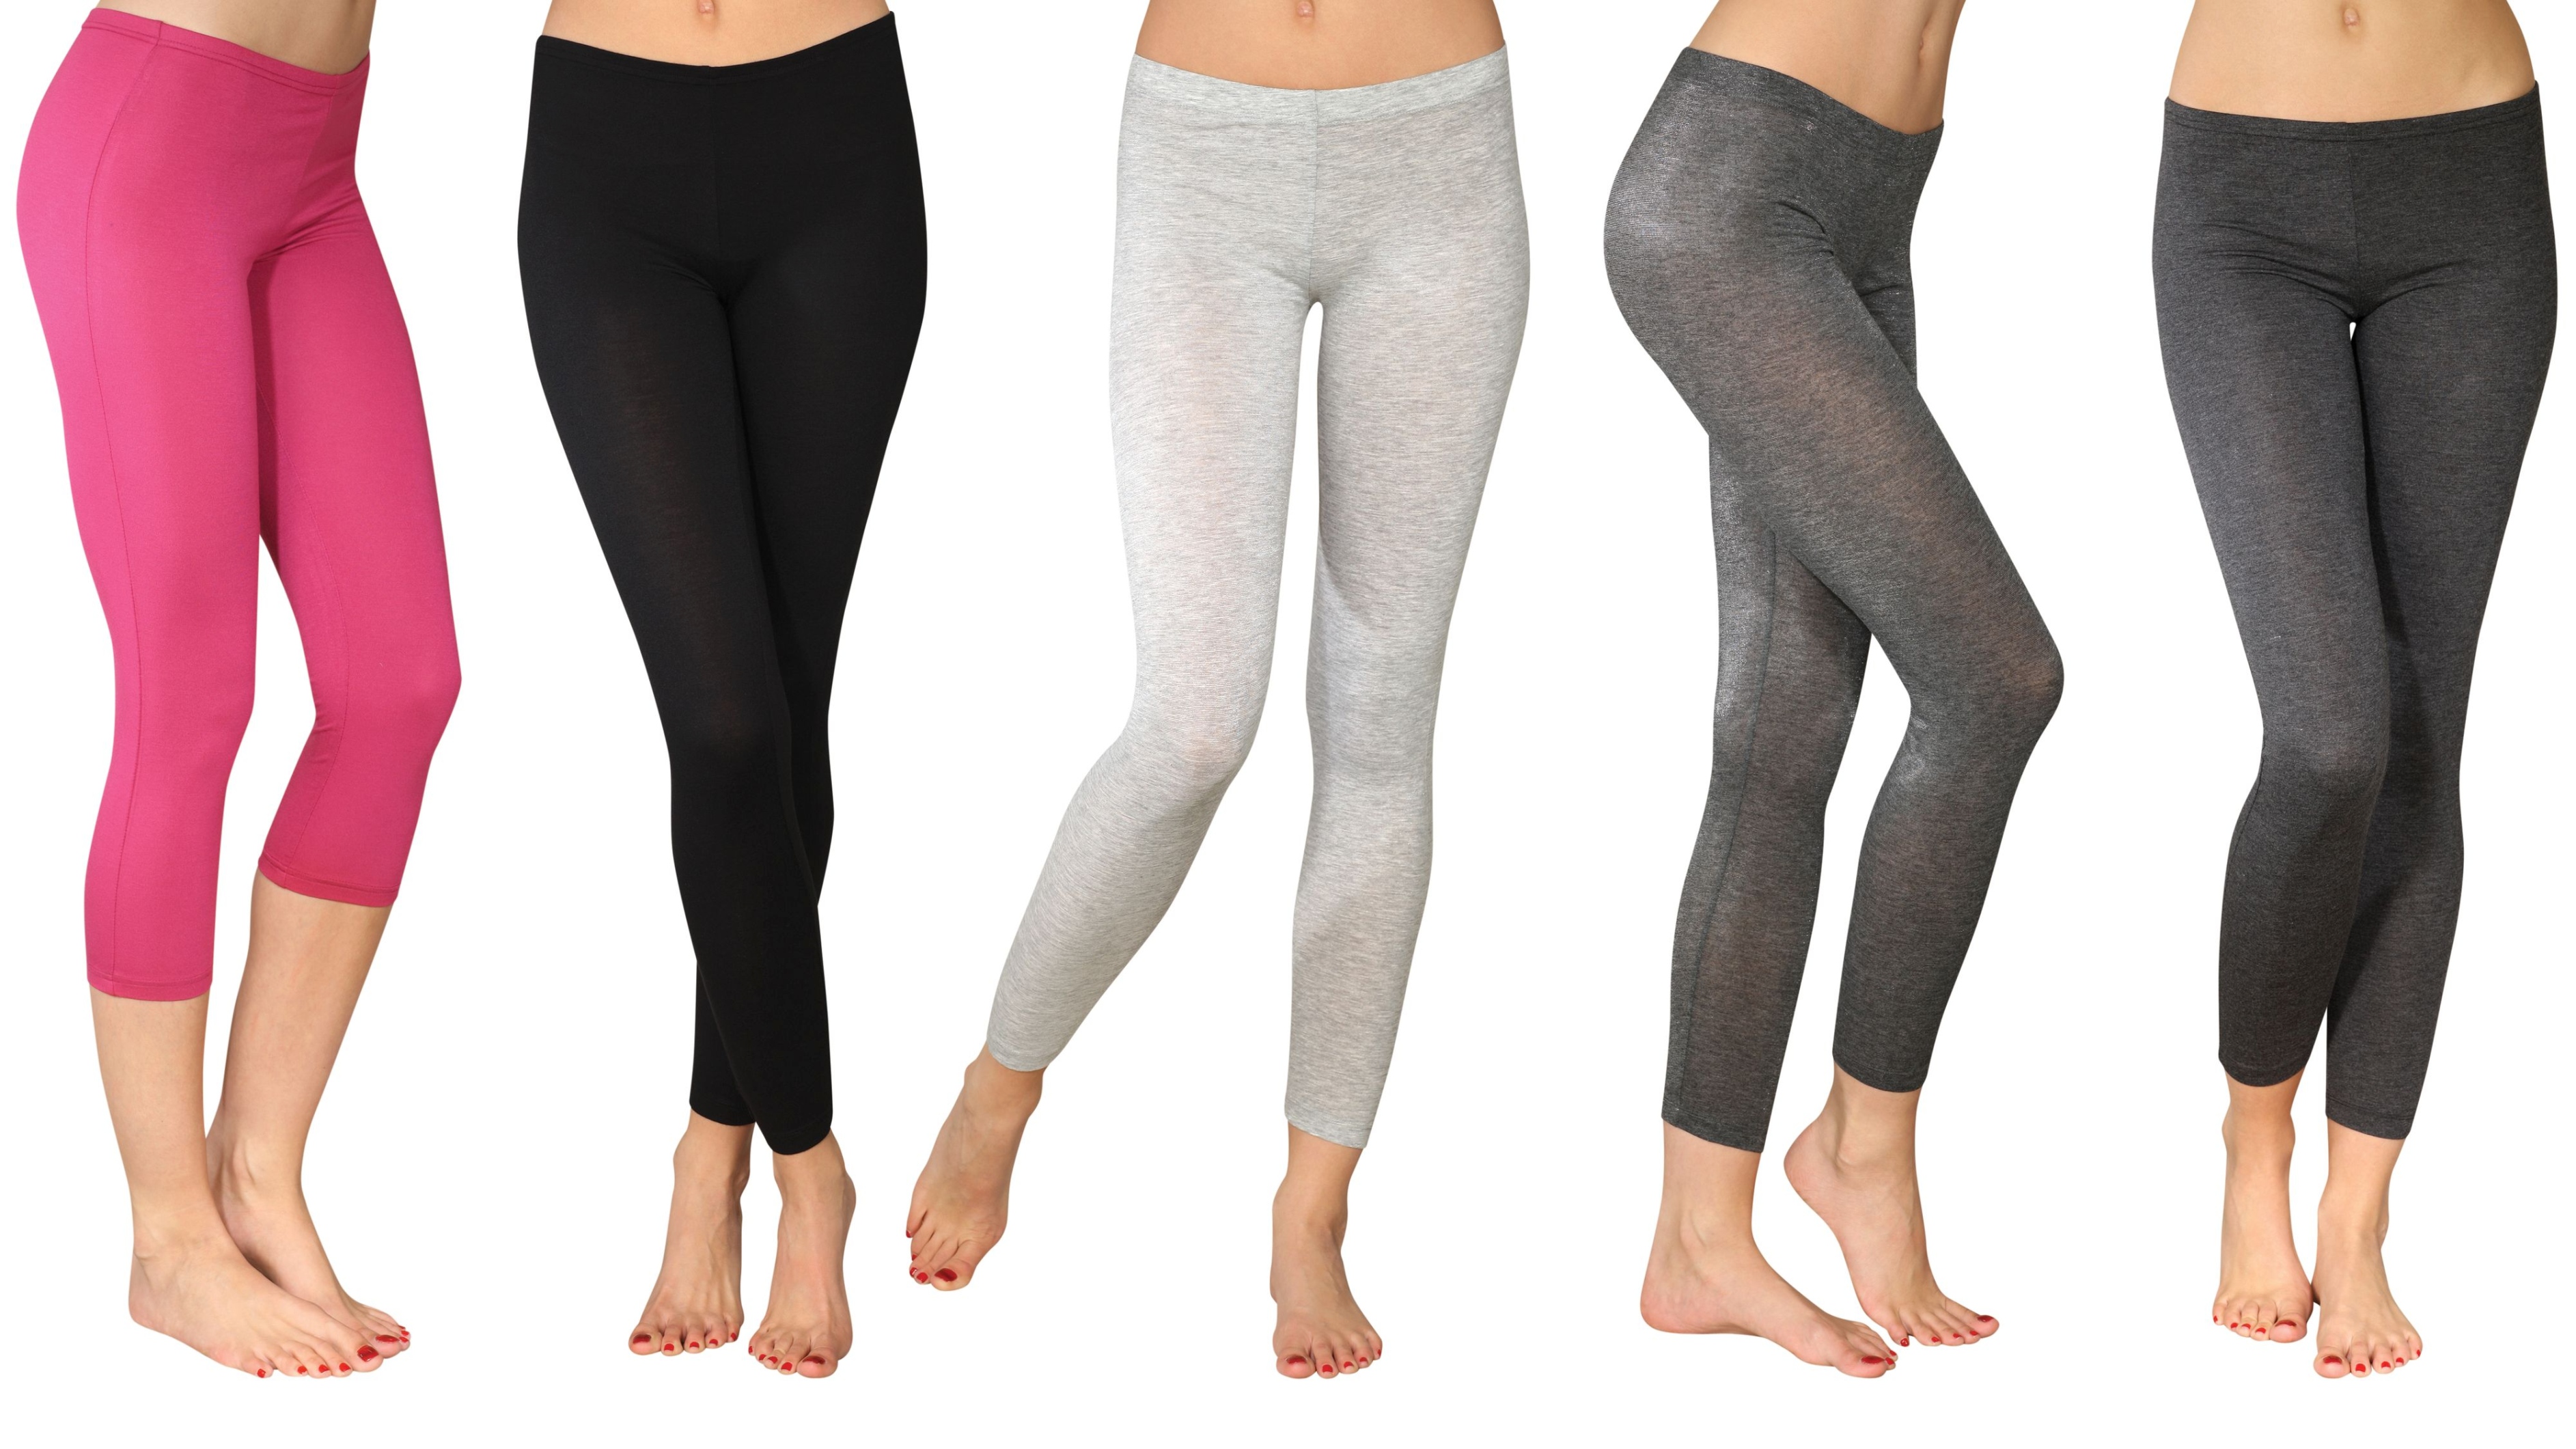 How yoga pants became an object of controversy and defiance in